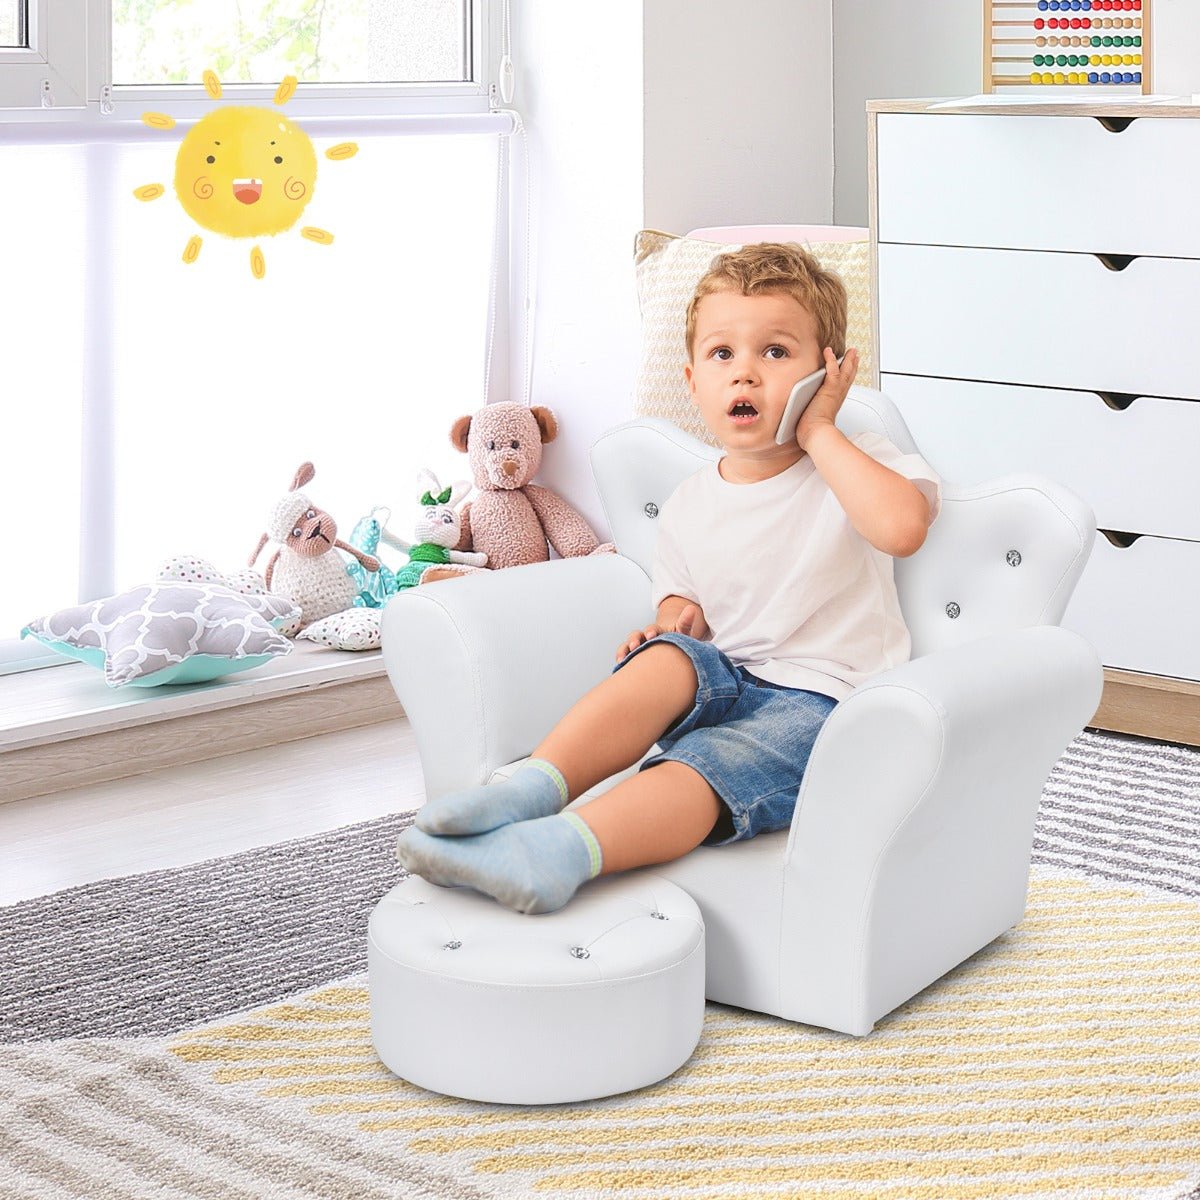 Get Kids Sofa with Crown-Shaped Backrest: Regal Comfort for Toddlers